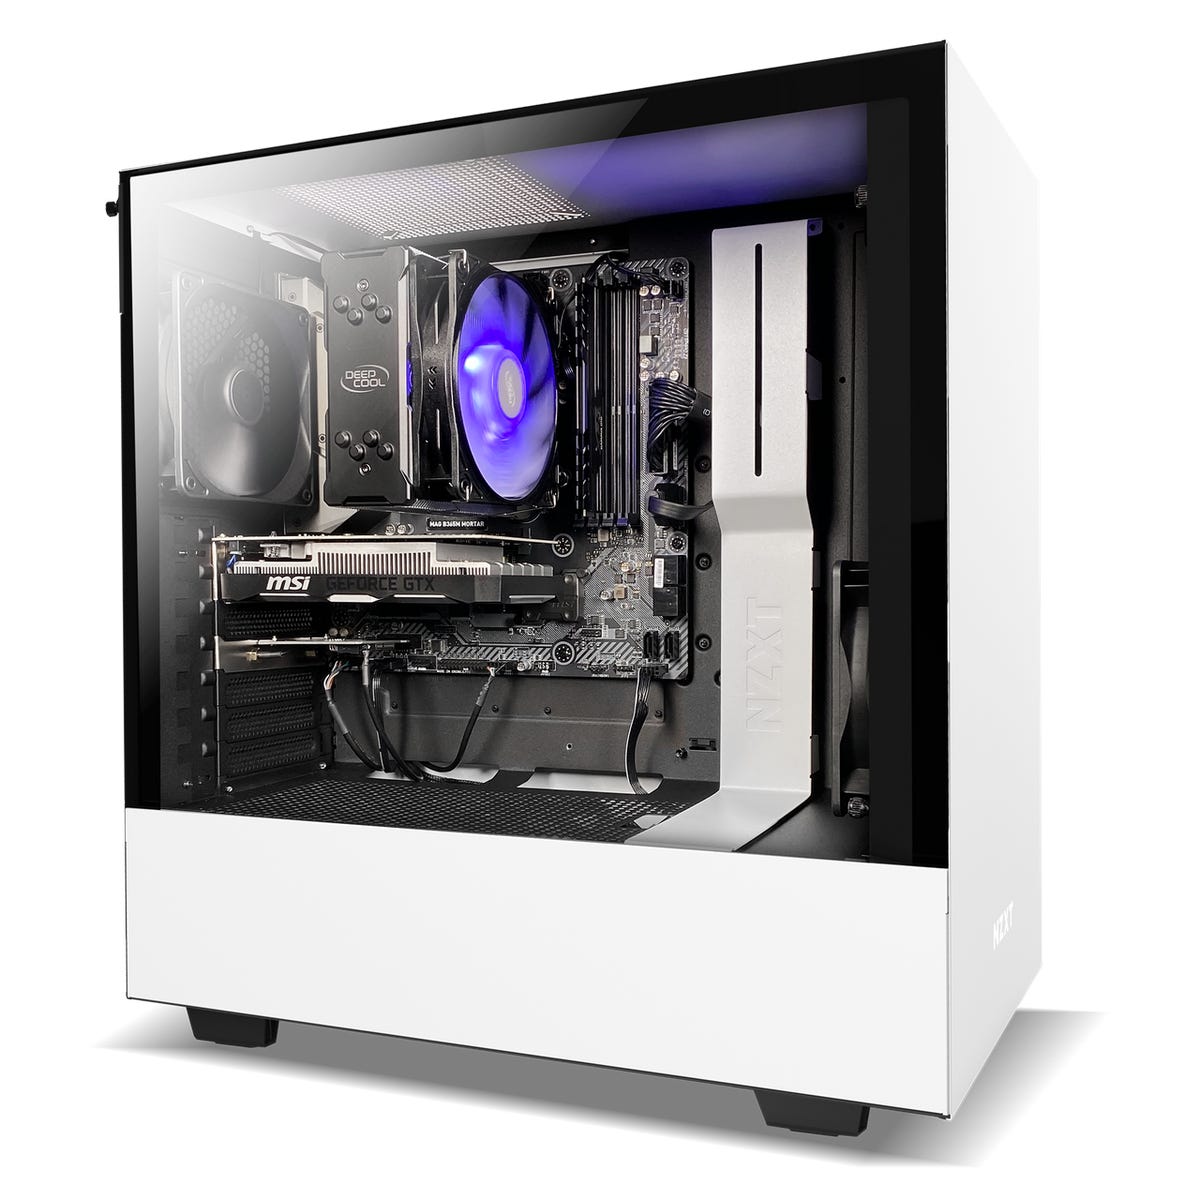 Nzxt Looks To Lure Beginning Gamers With Its 699 Starter Pc Desktop Zdnet